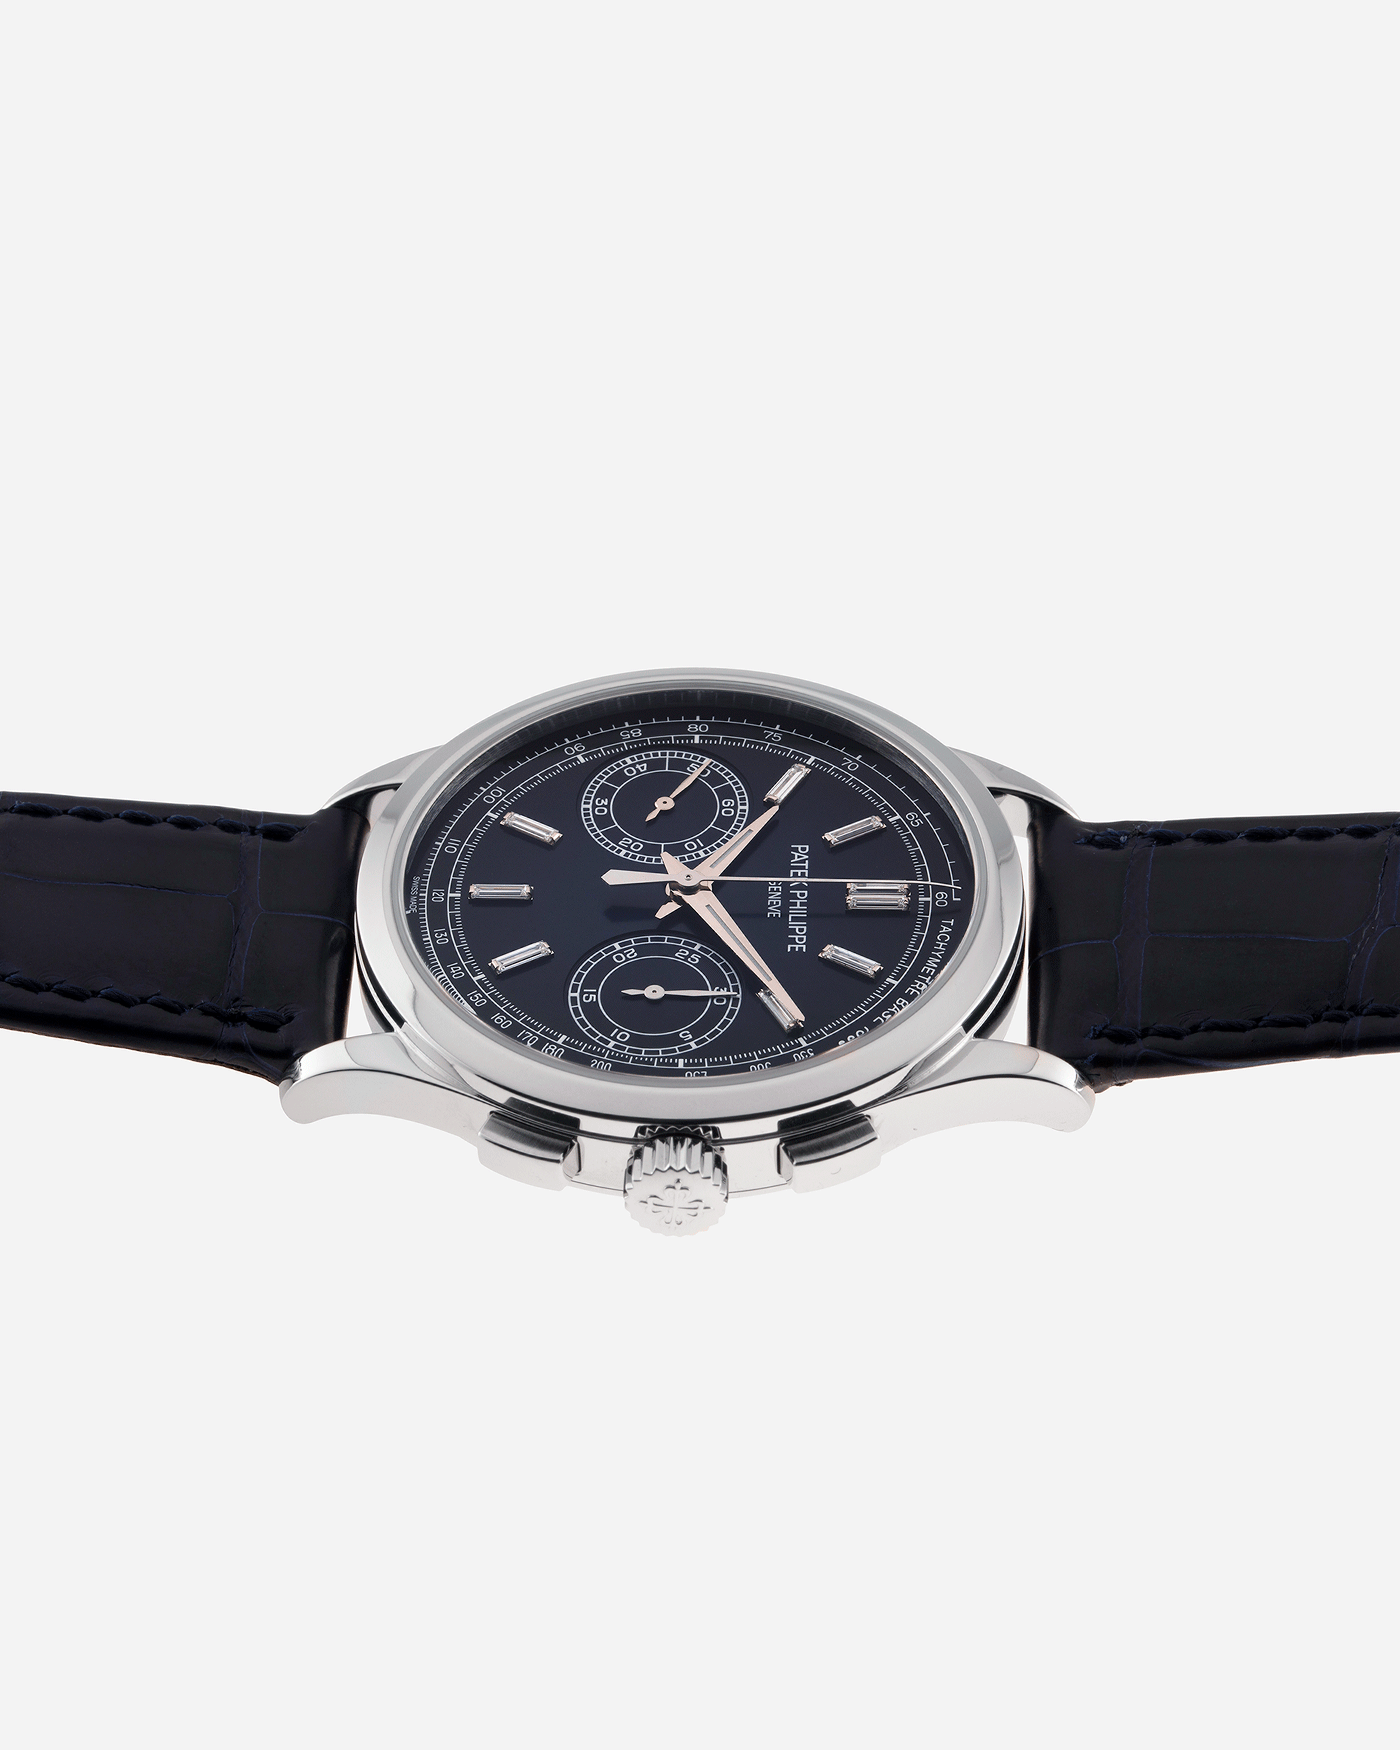 Brand: Patek Philippe Year: 2019 Model: Chronograph Reference Number: 5170P Material: Platinum Movement: In-House Caliber CH 29-535 PS Case Diameter: 39.4mm Bracelet: Nostime Patek Philippe Blue Alligator Strap with Platinum Deployant Clasp